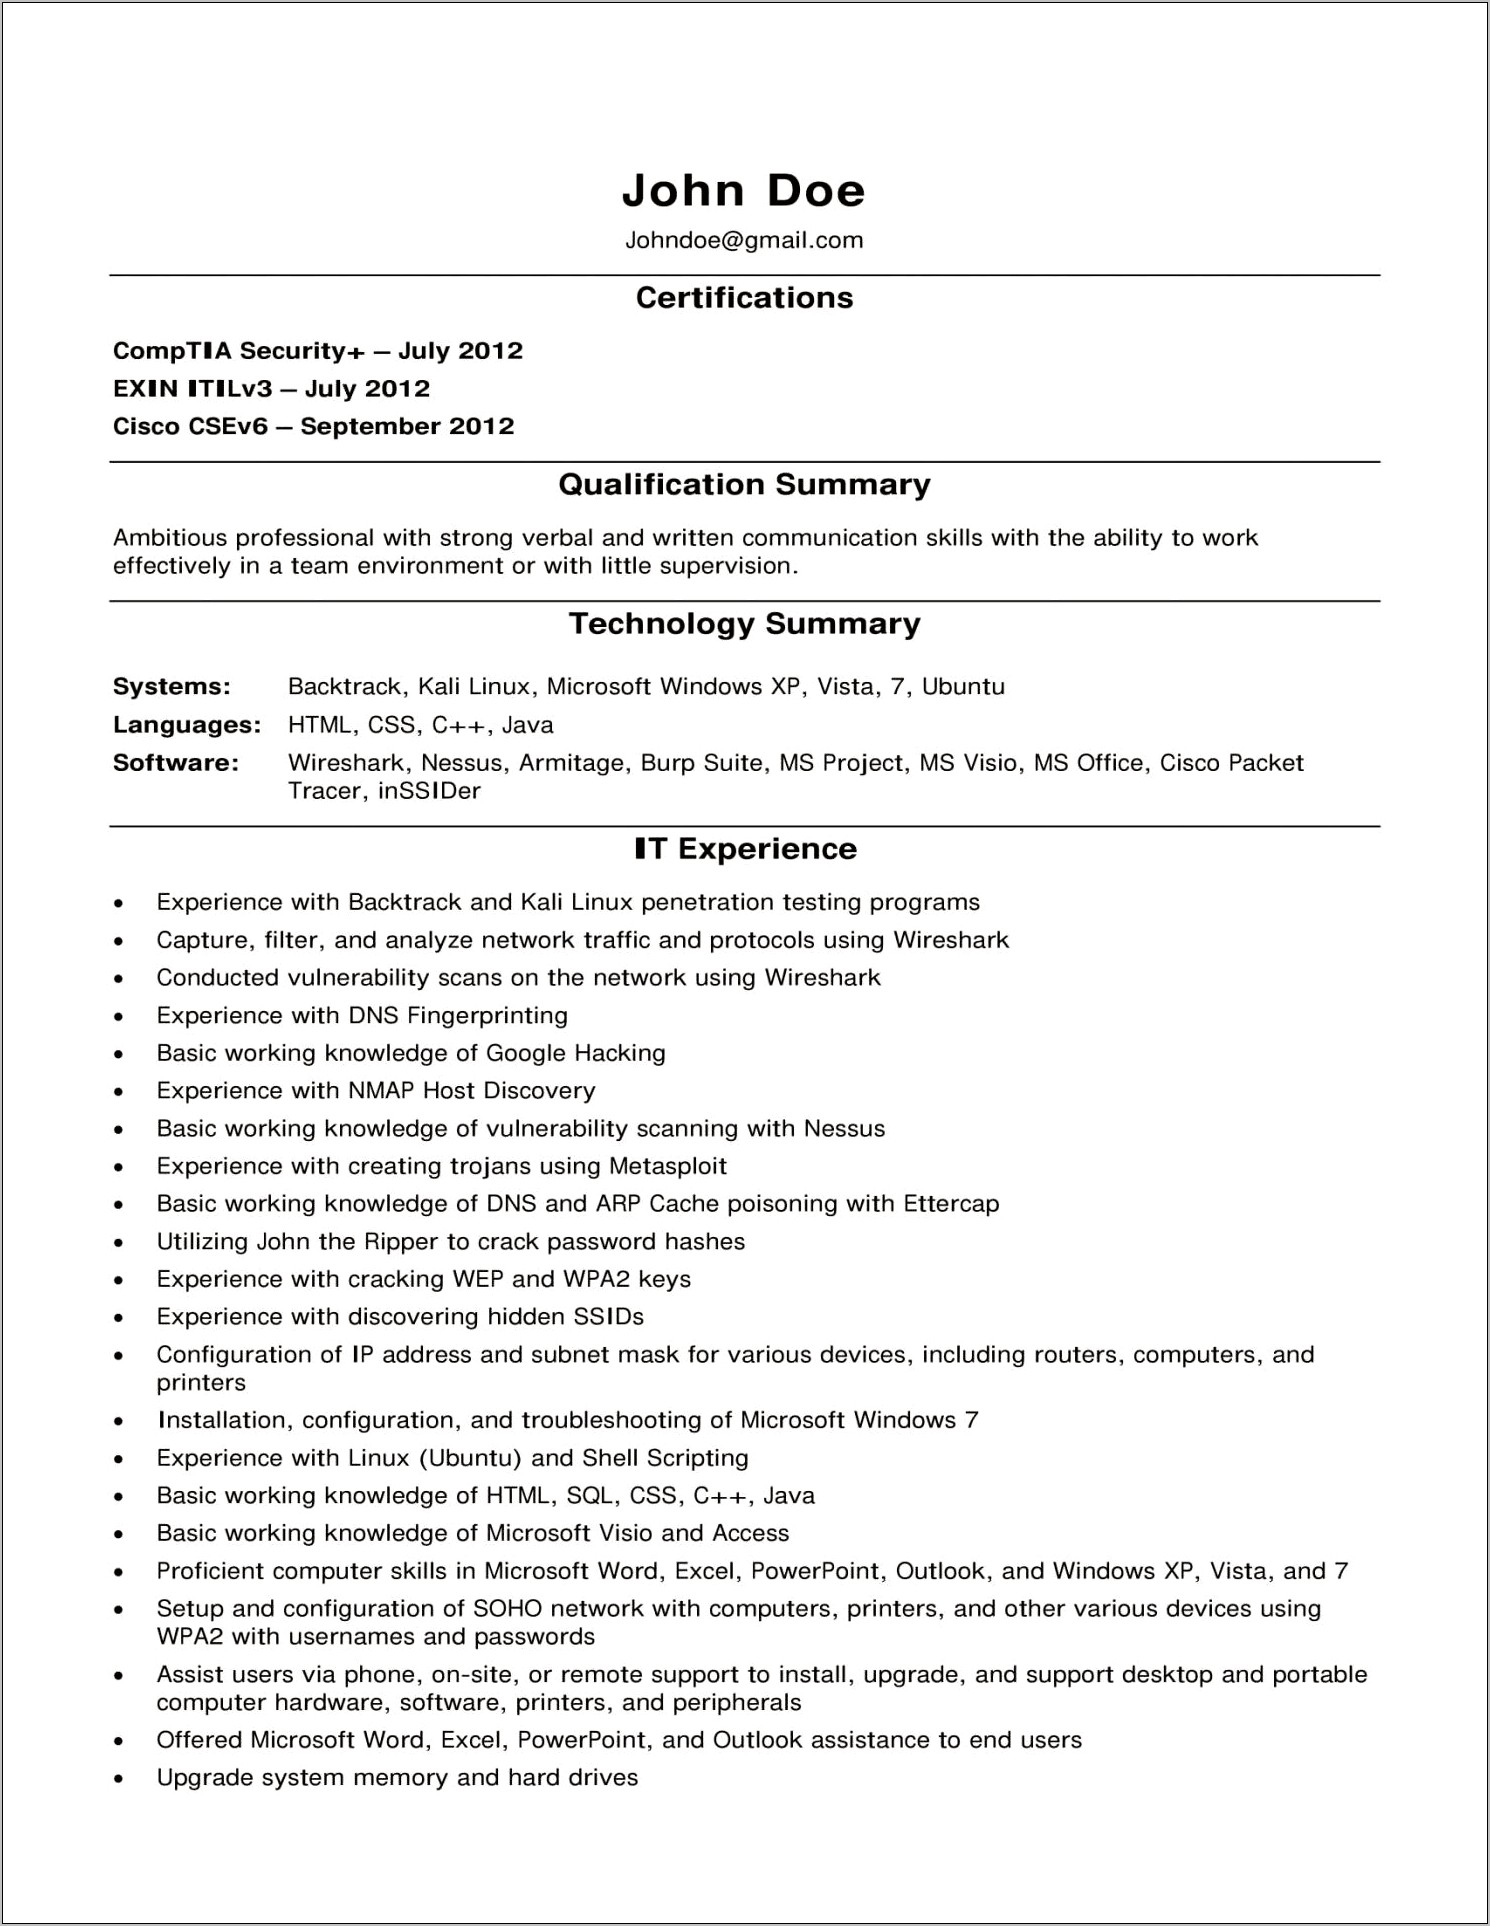 Sample Resume With Ccna Logo - Resume Example Gallery